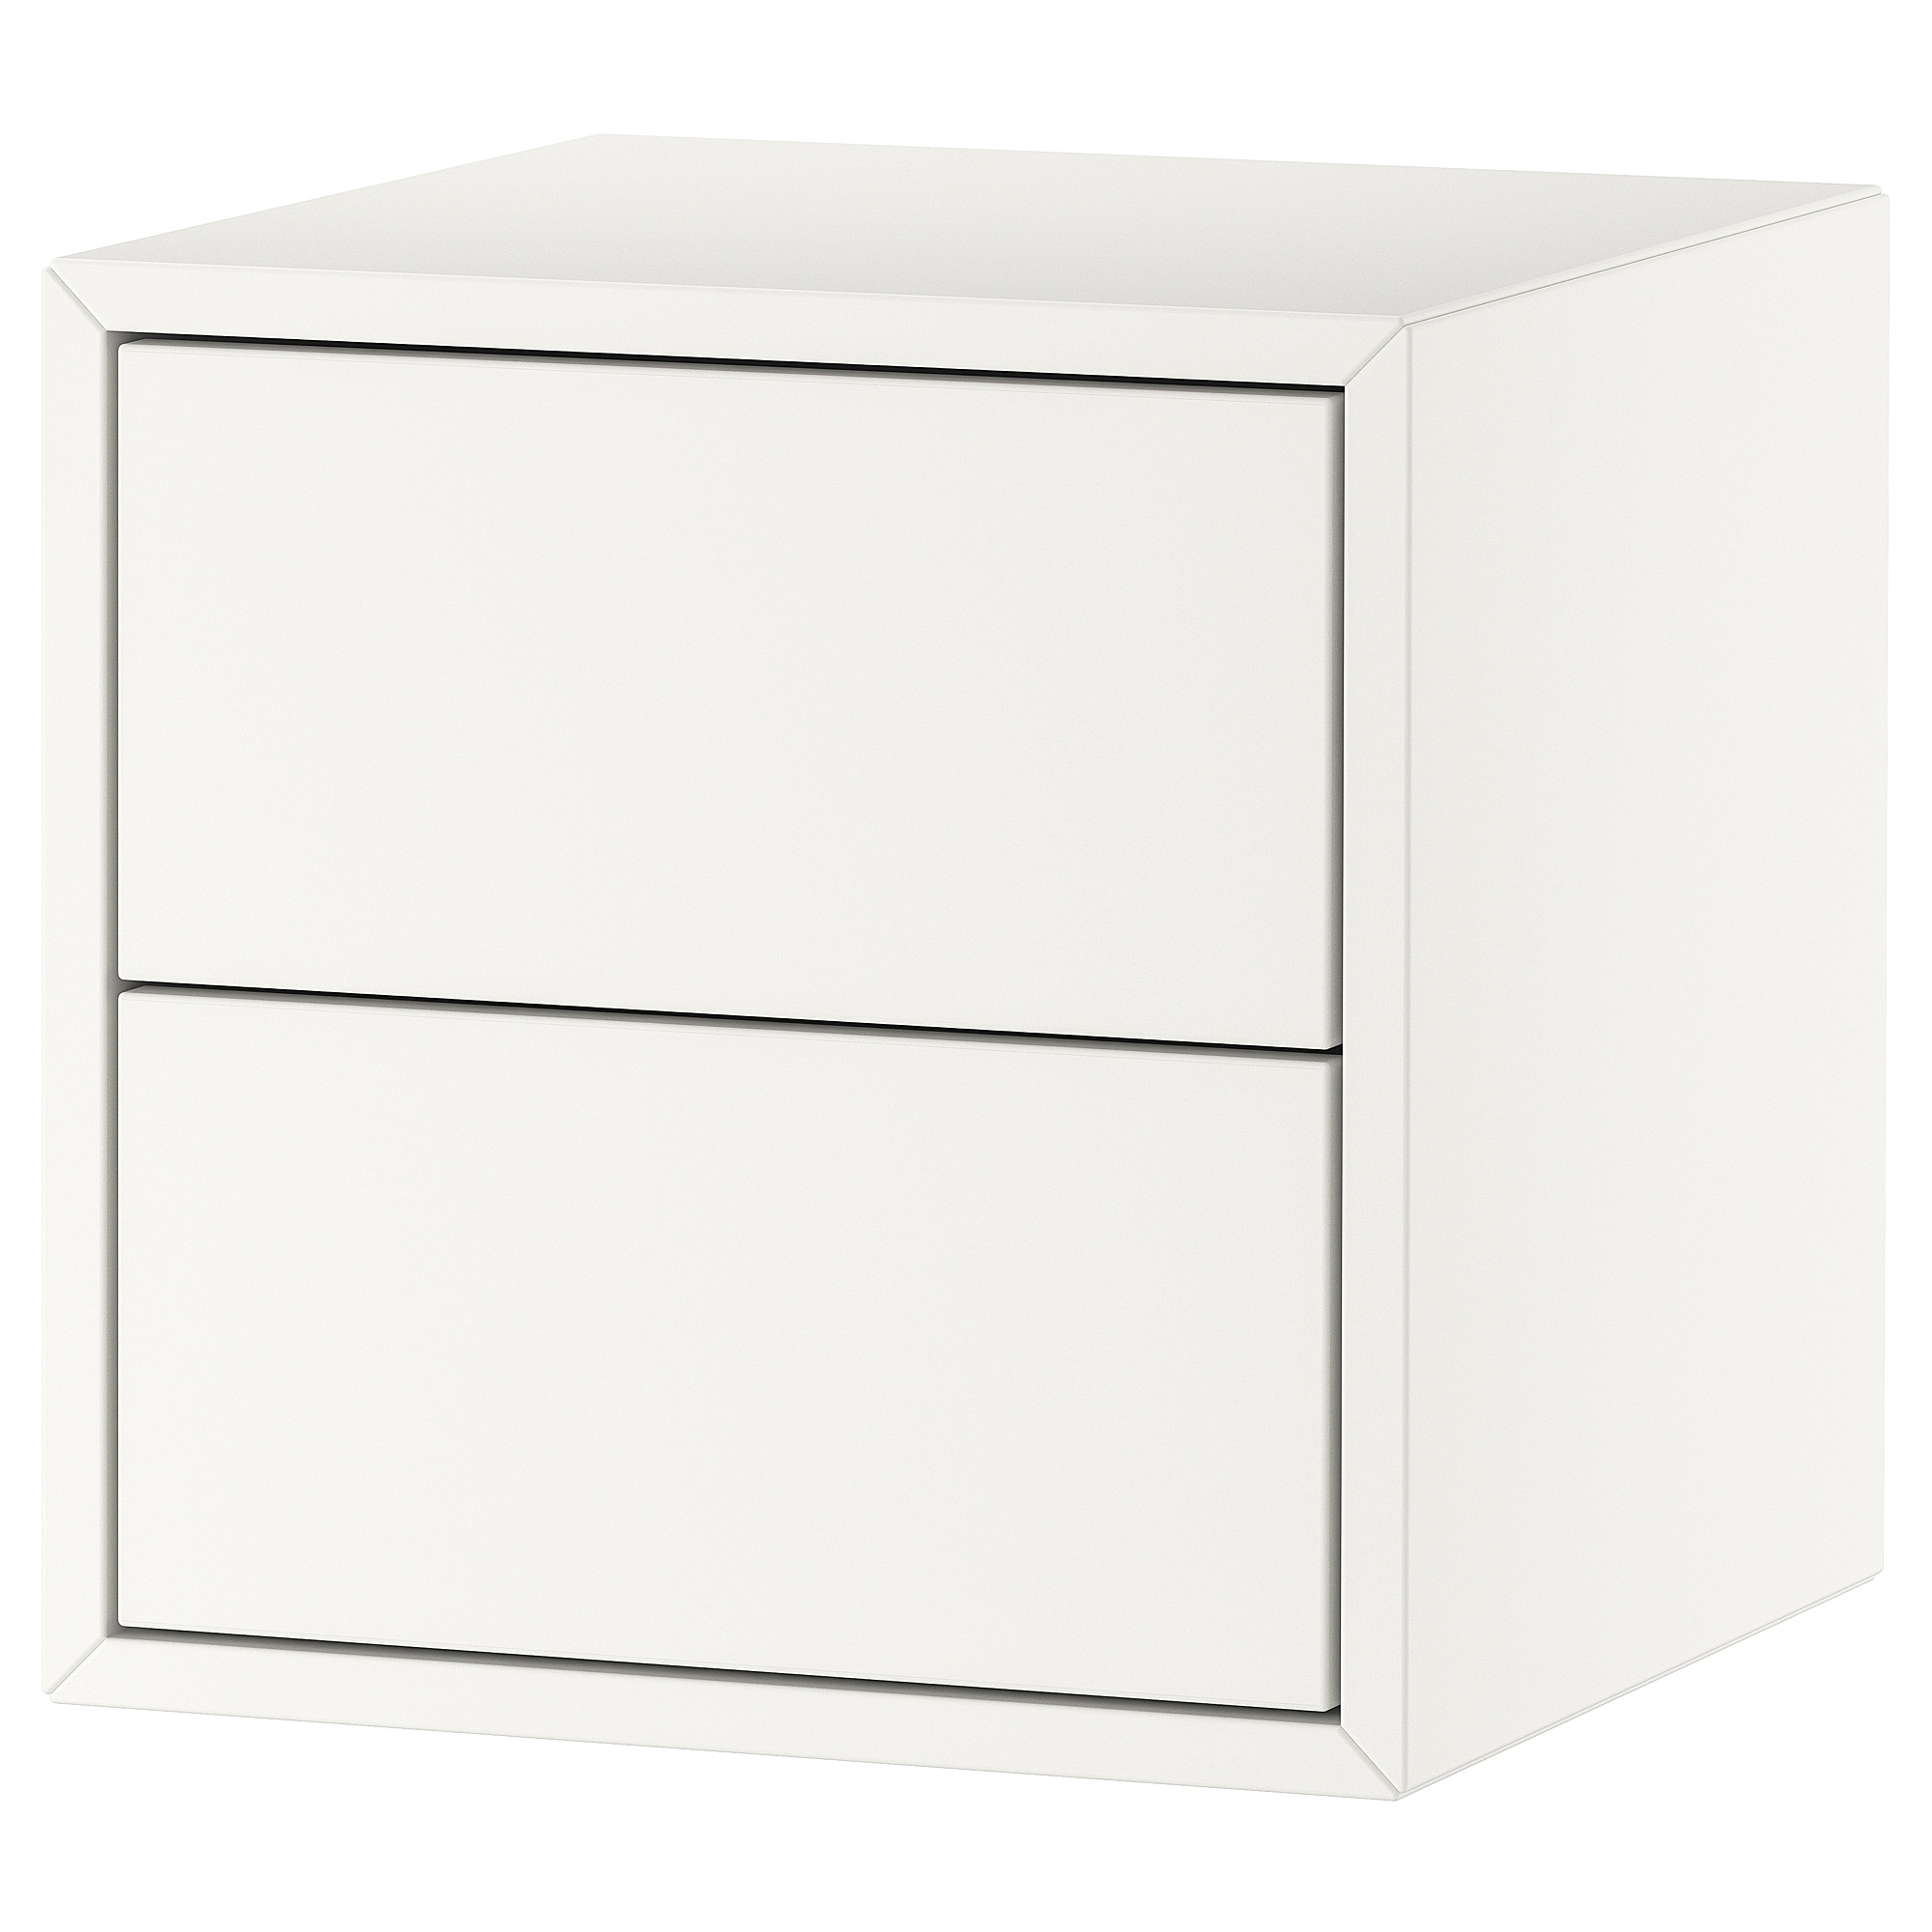 EKET wall cabinet with 2 drawers